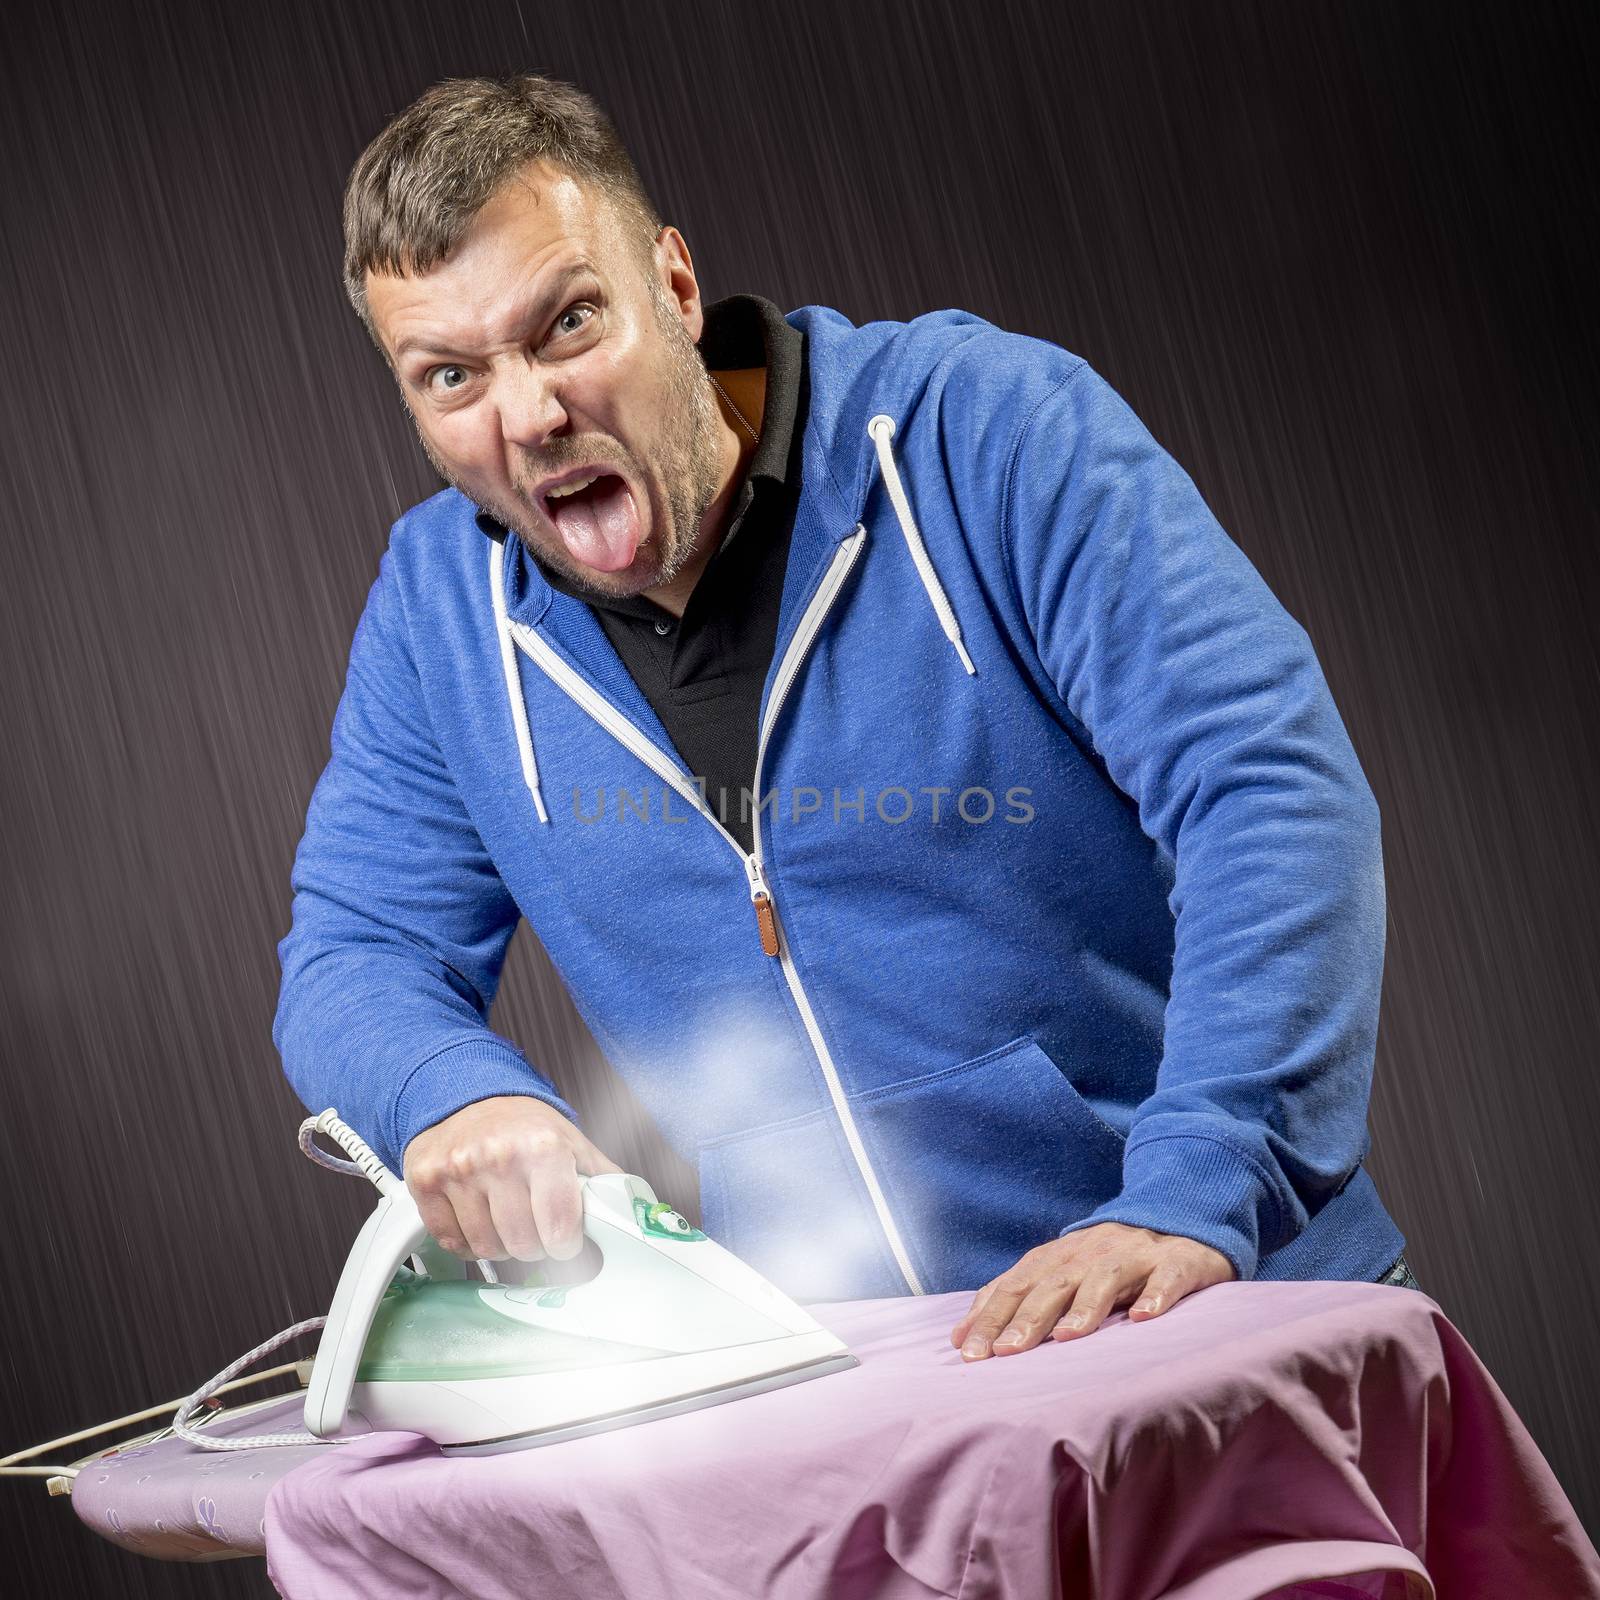 Angry man doing housework and ironing a shirt